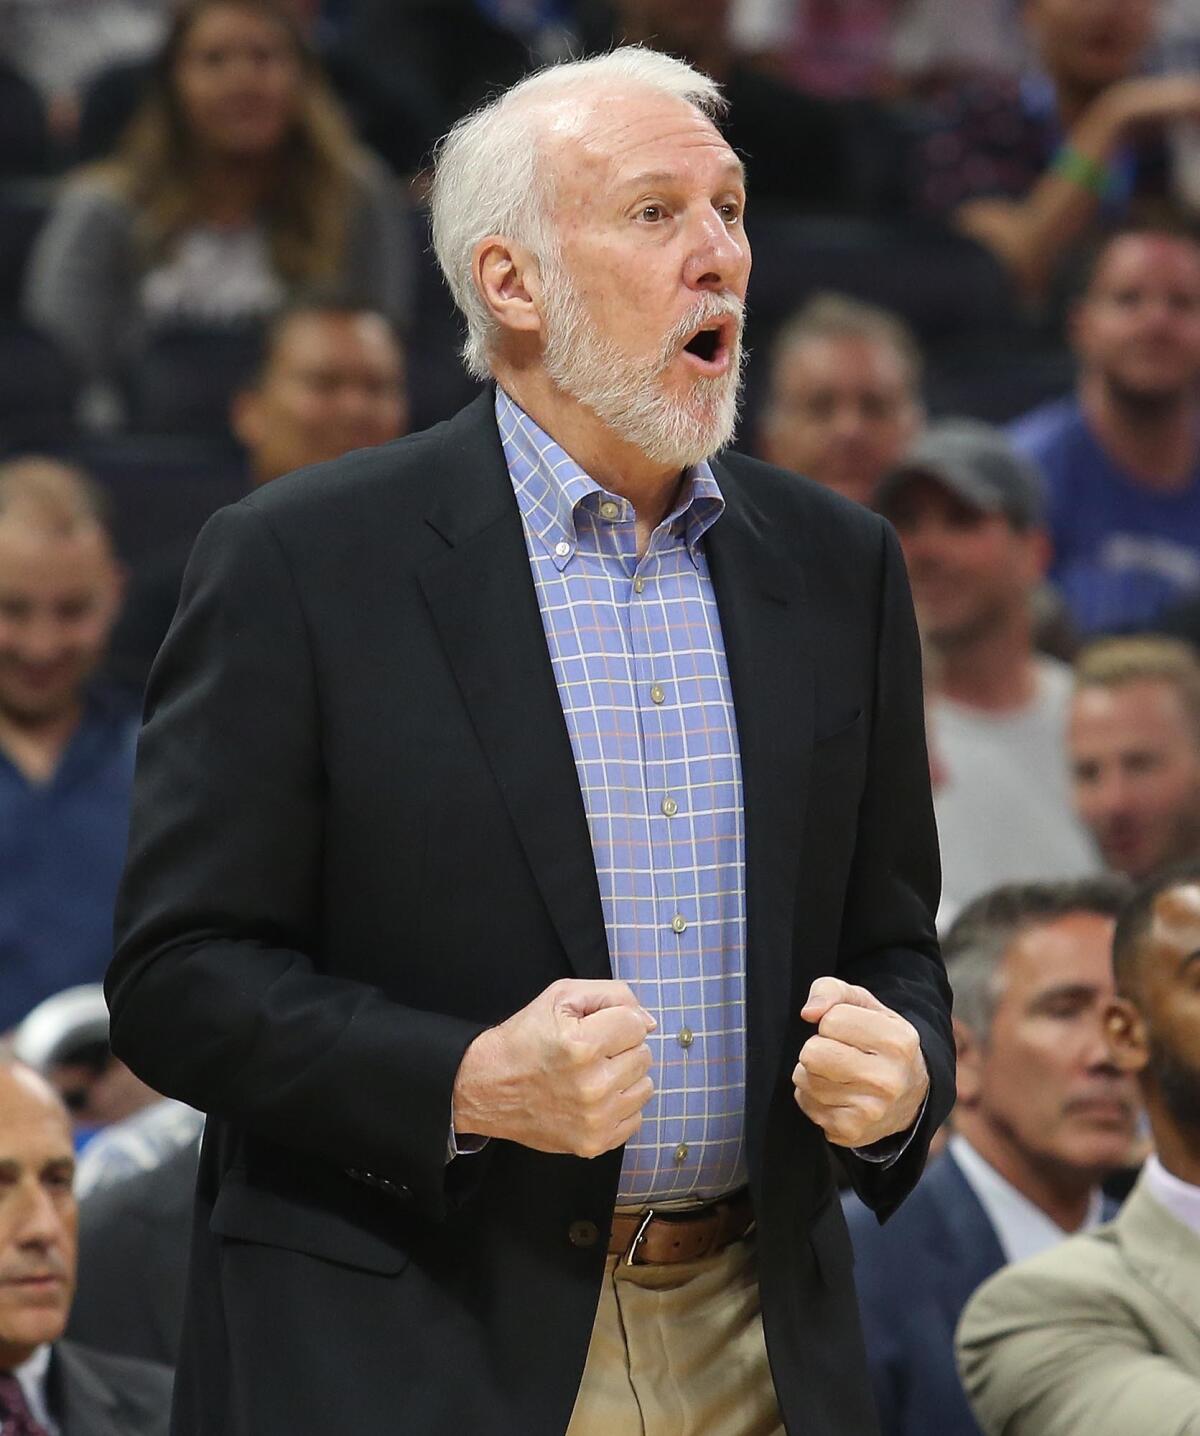 Spurs coach Gregg Popovich calls out to his players during a game against the Magic on Oct. 27.